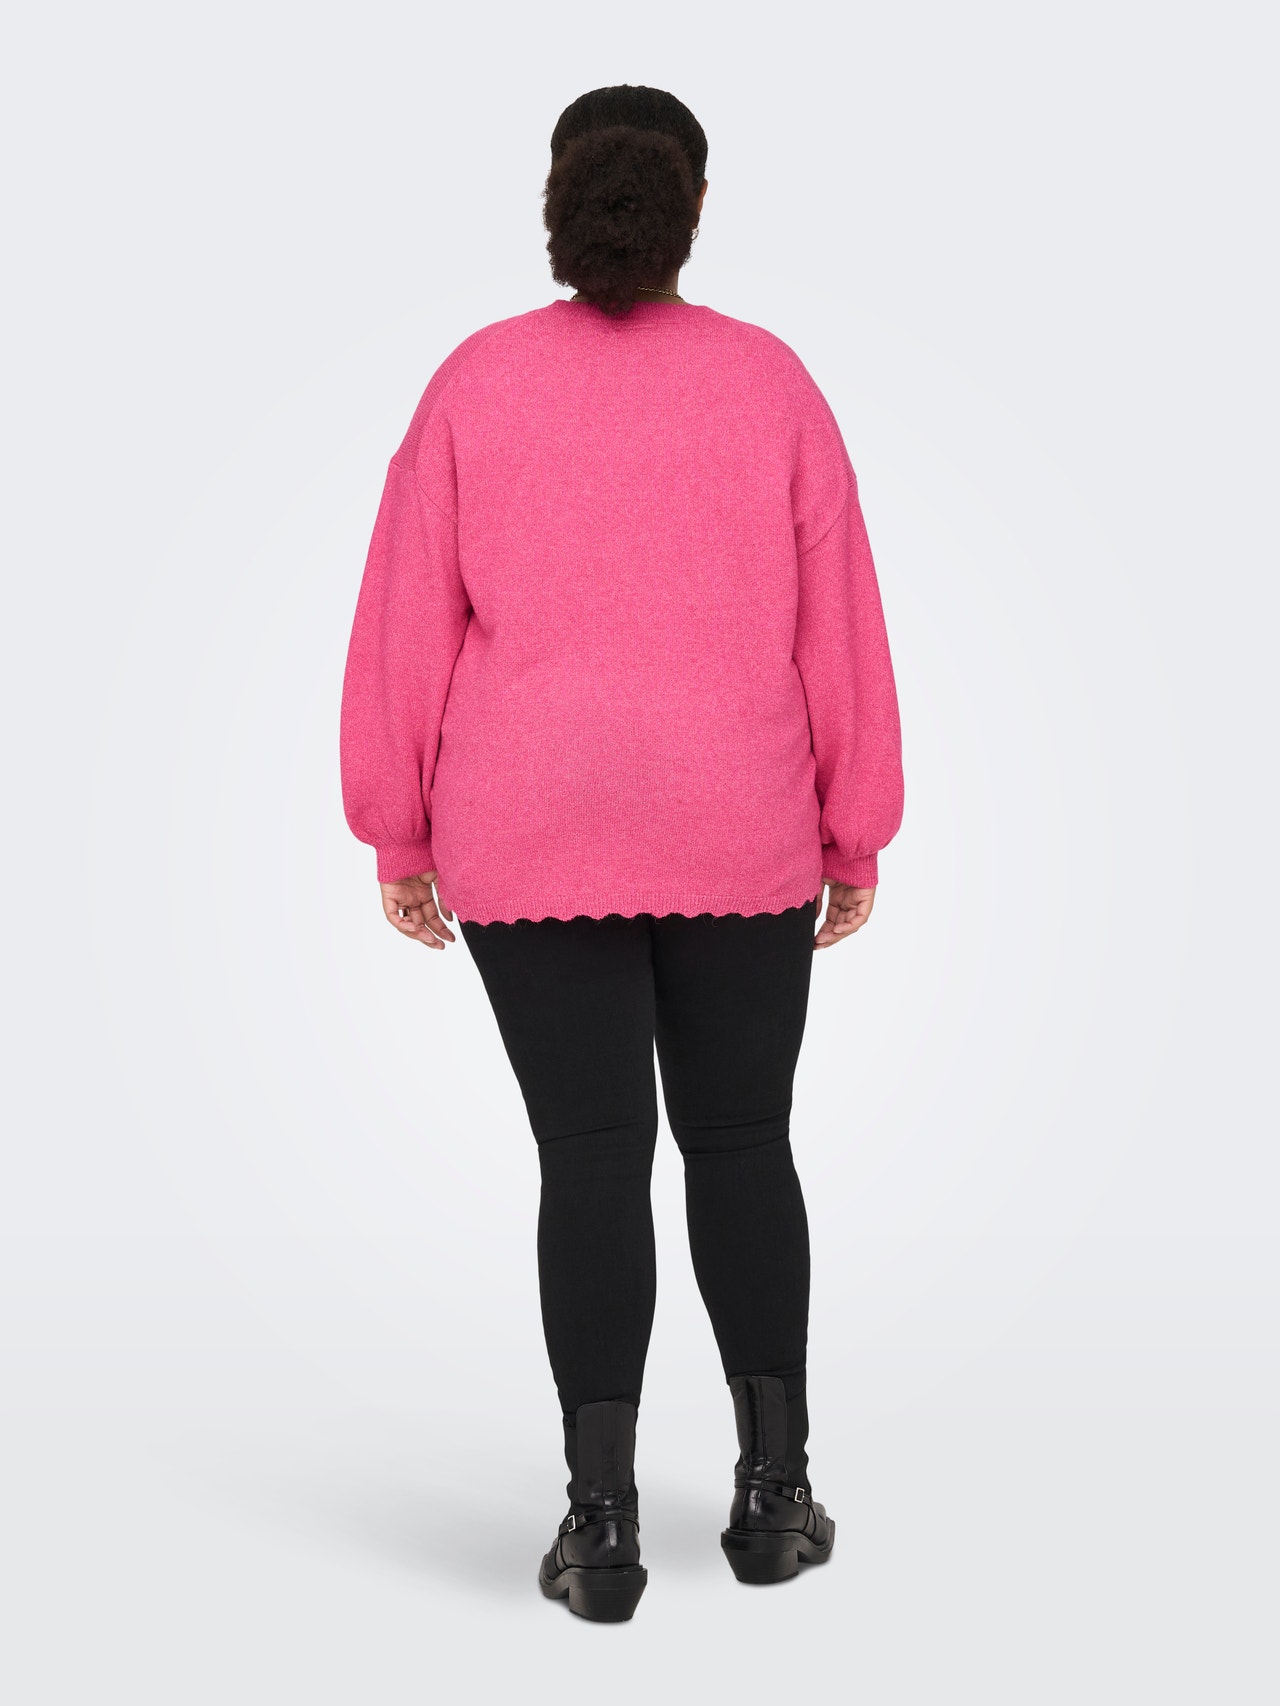 ONLY Curvy Solid colored Knitted Pullover -Fuchsia Purple - 15289366